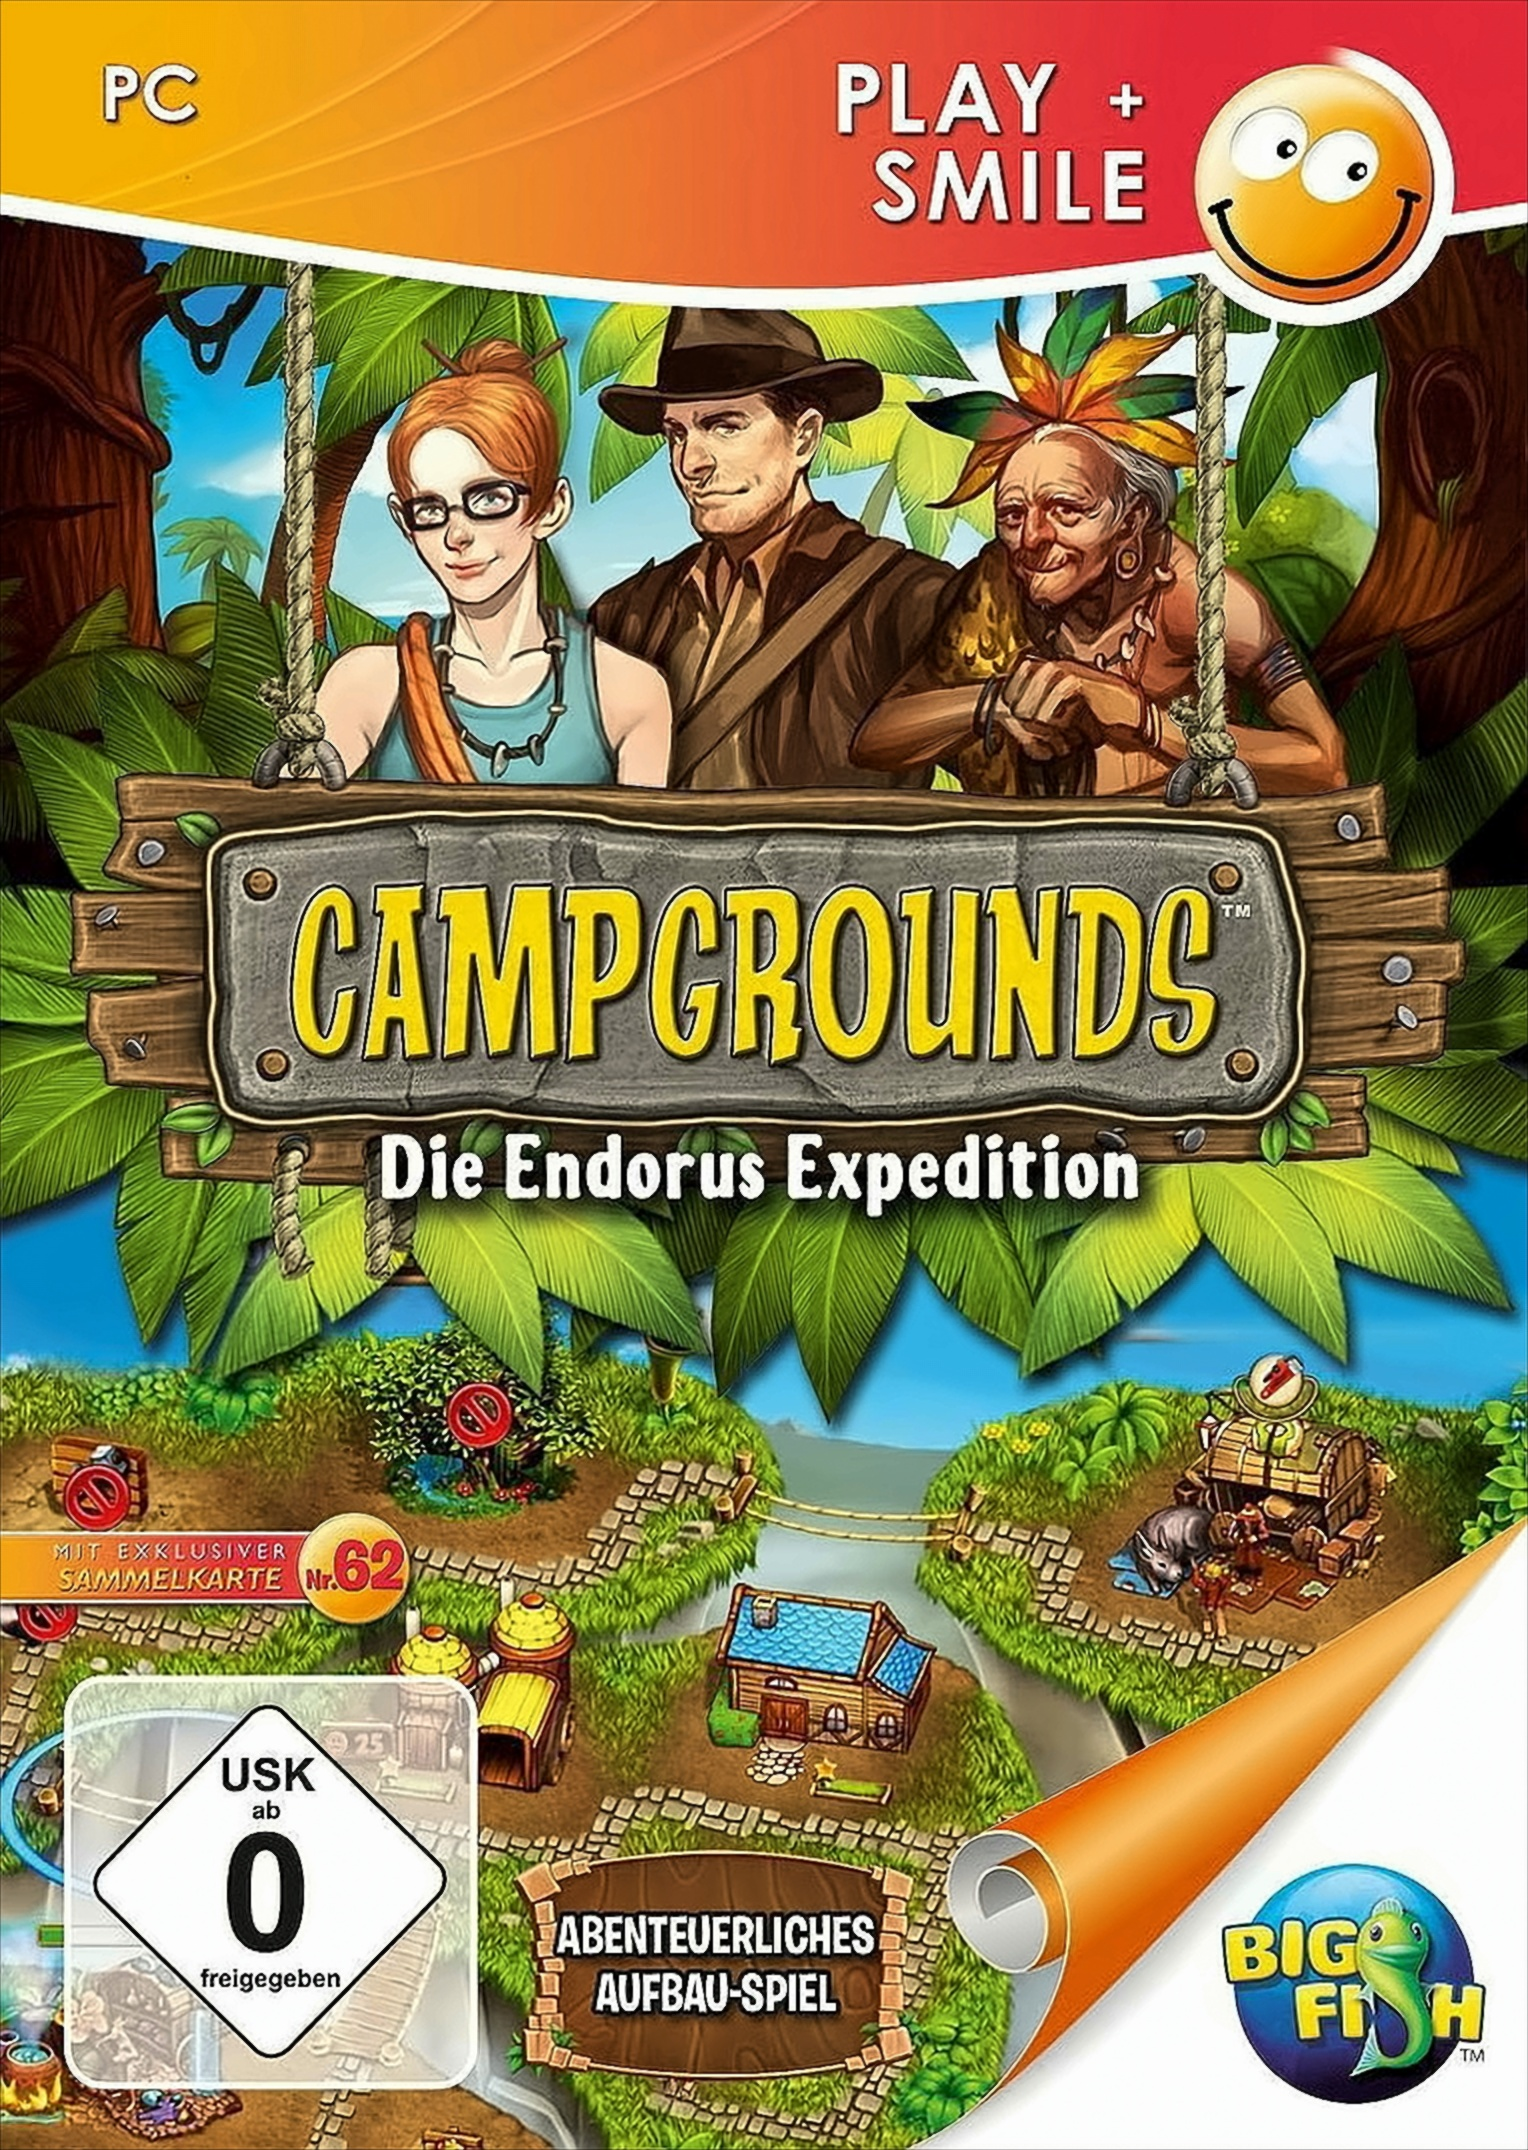 Campgrounds - 2 Expedition Die Endorus - [PC]